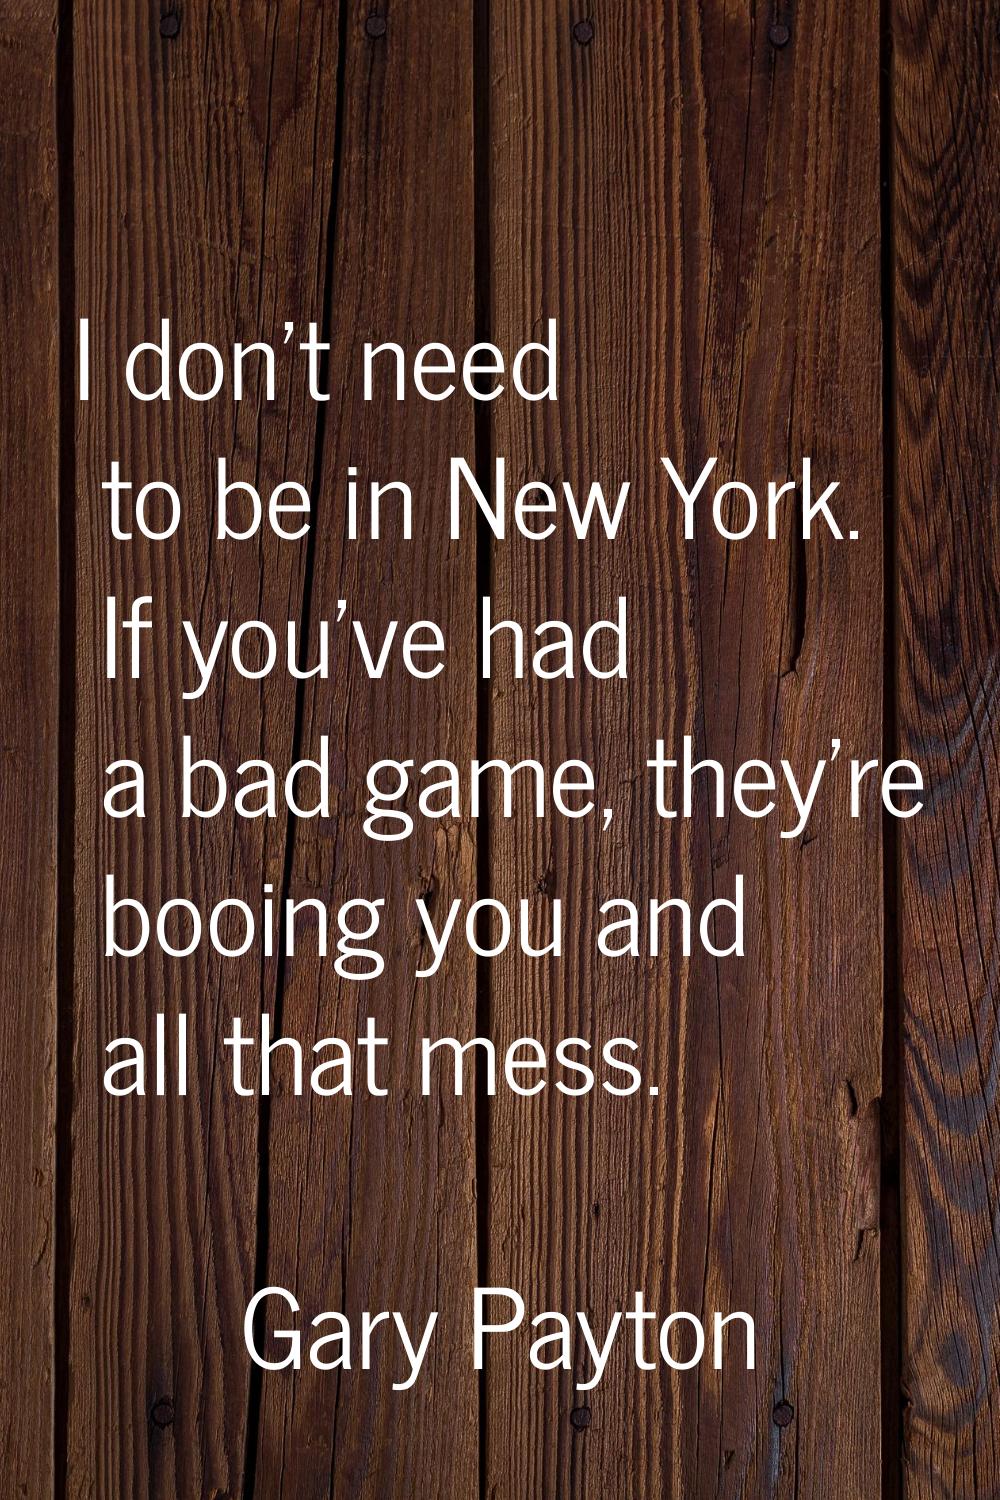 I don't need to be in New York. If you've had a bad game, they're booing you and all that mess.